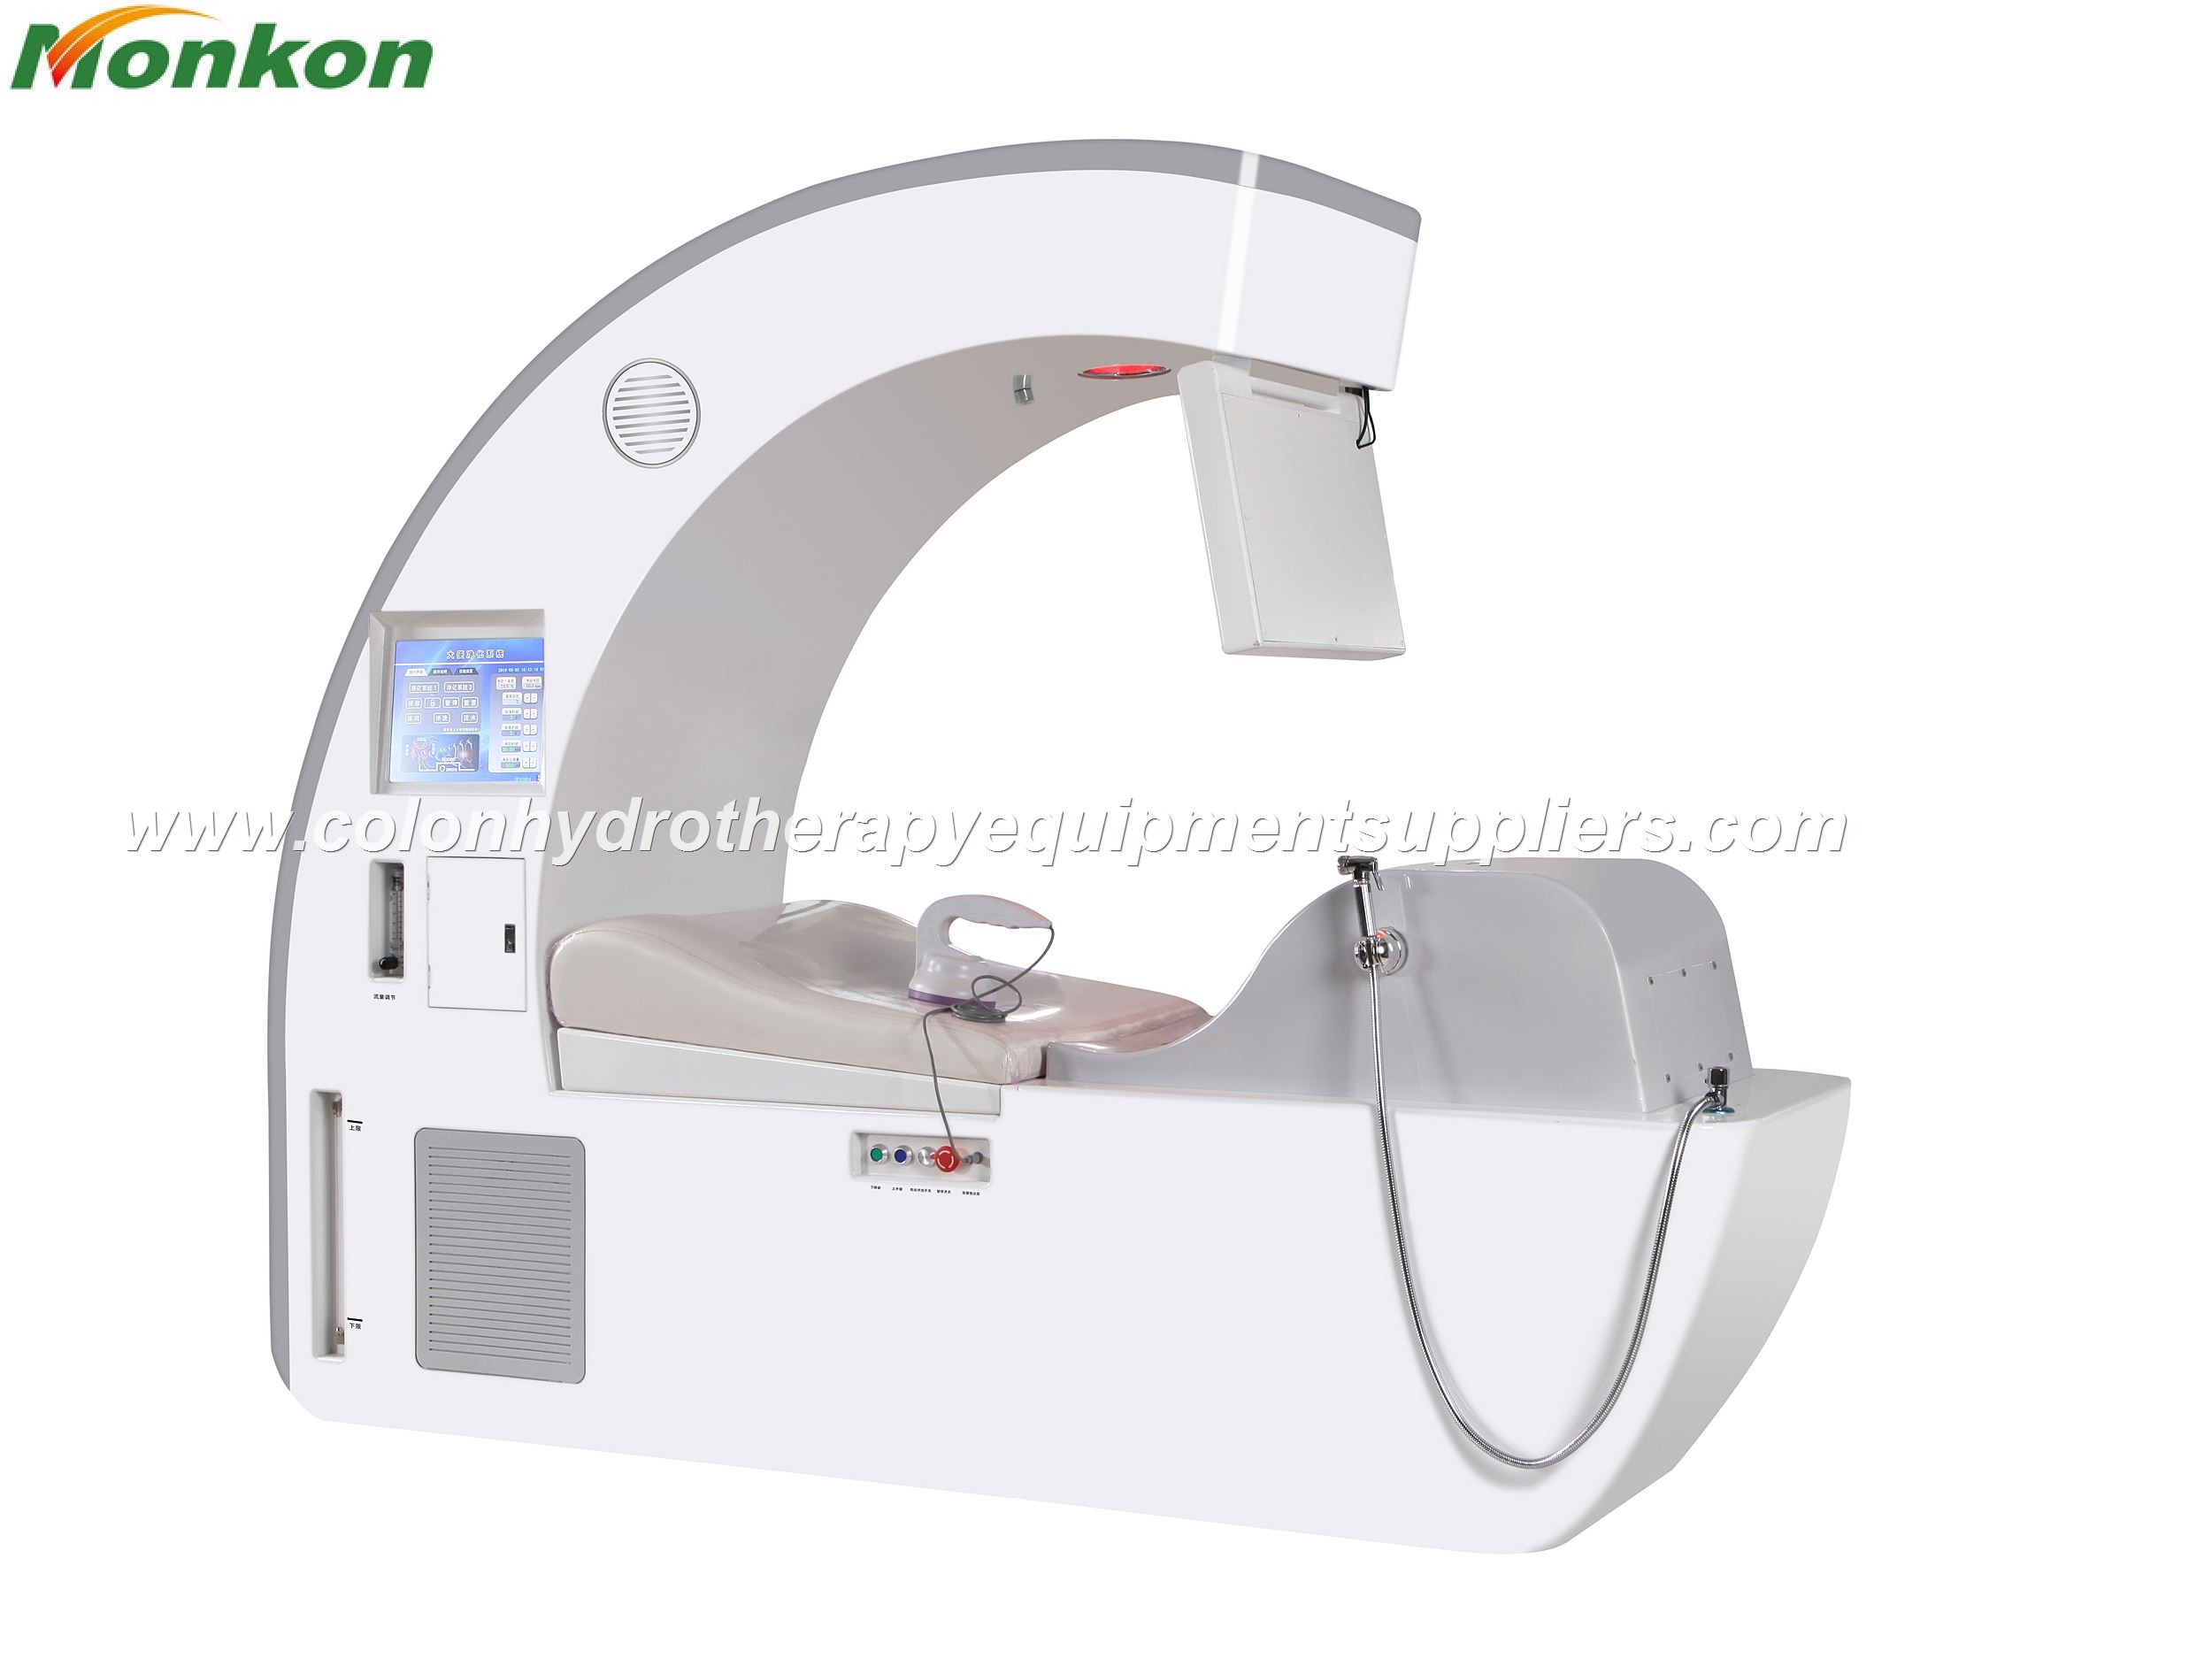 Colon Hydrotherapy Machine Suppliers in India